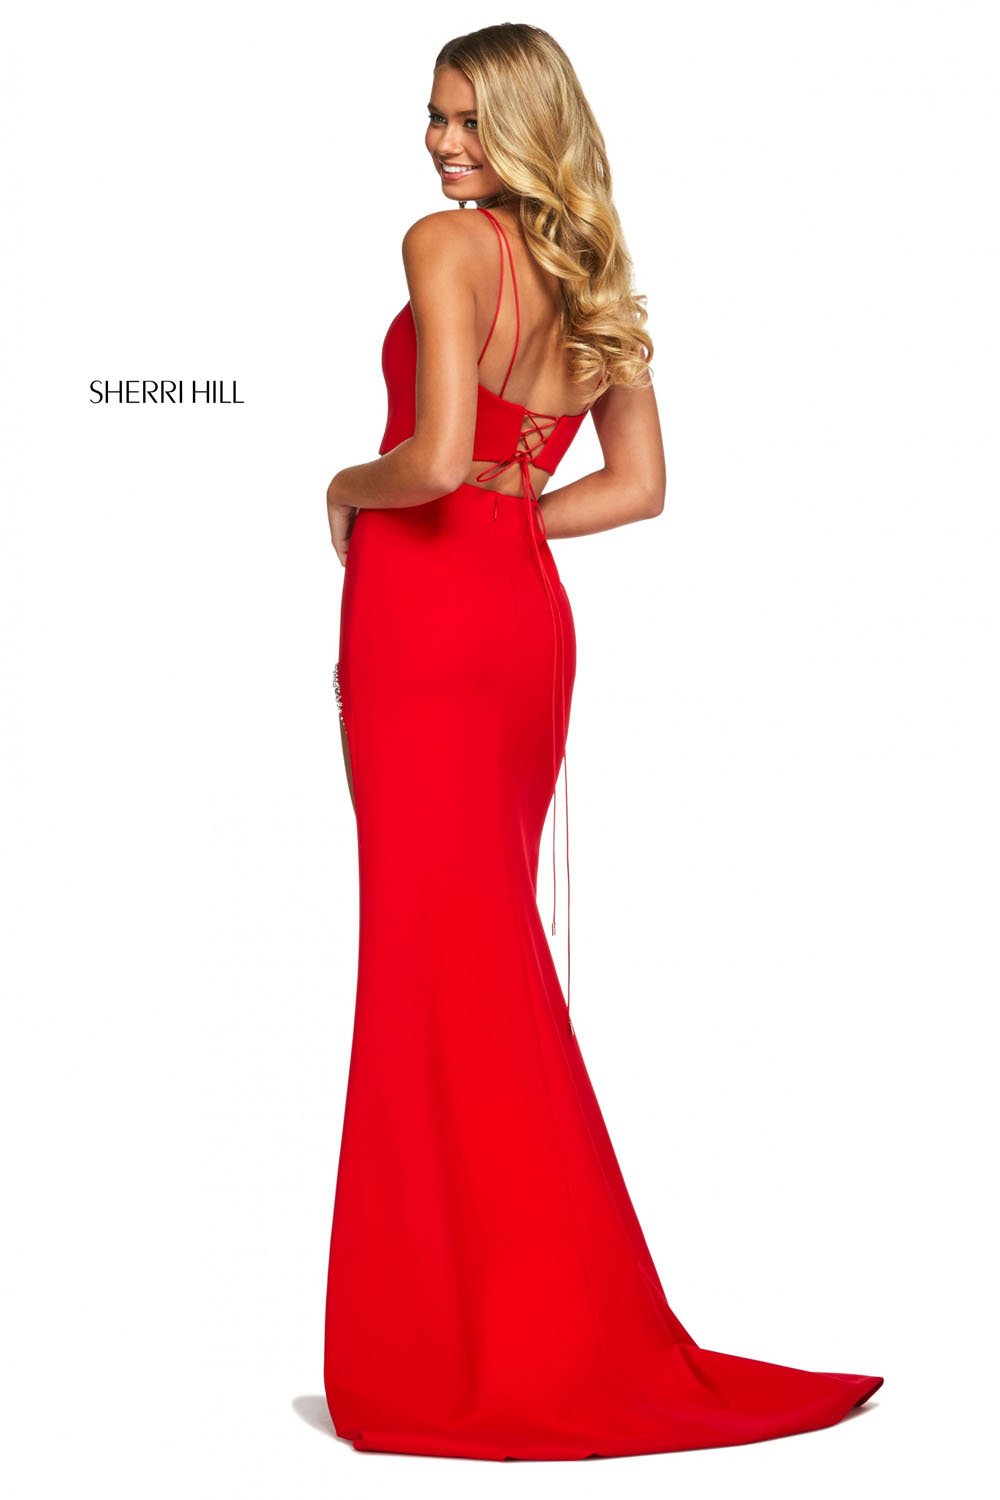 Sherri Hill 53602 dress images in these colors: Orange, Ivory, Royal, Light Blue, Pink, Navy, Yellow, Red, Black.